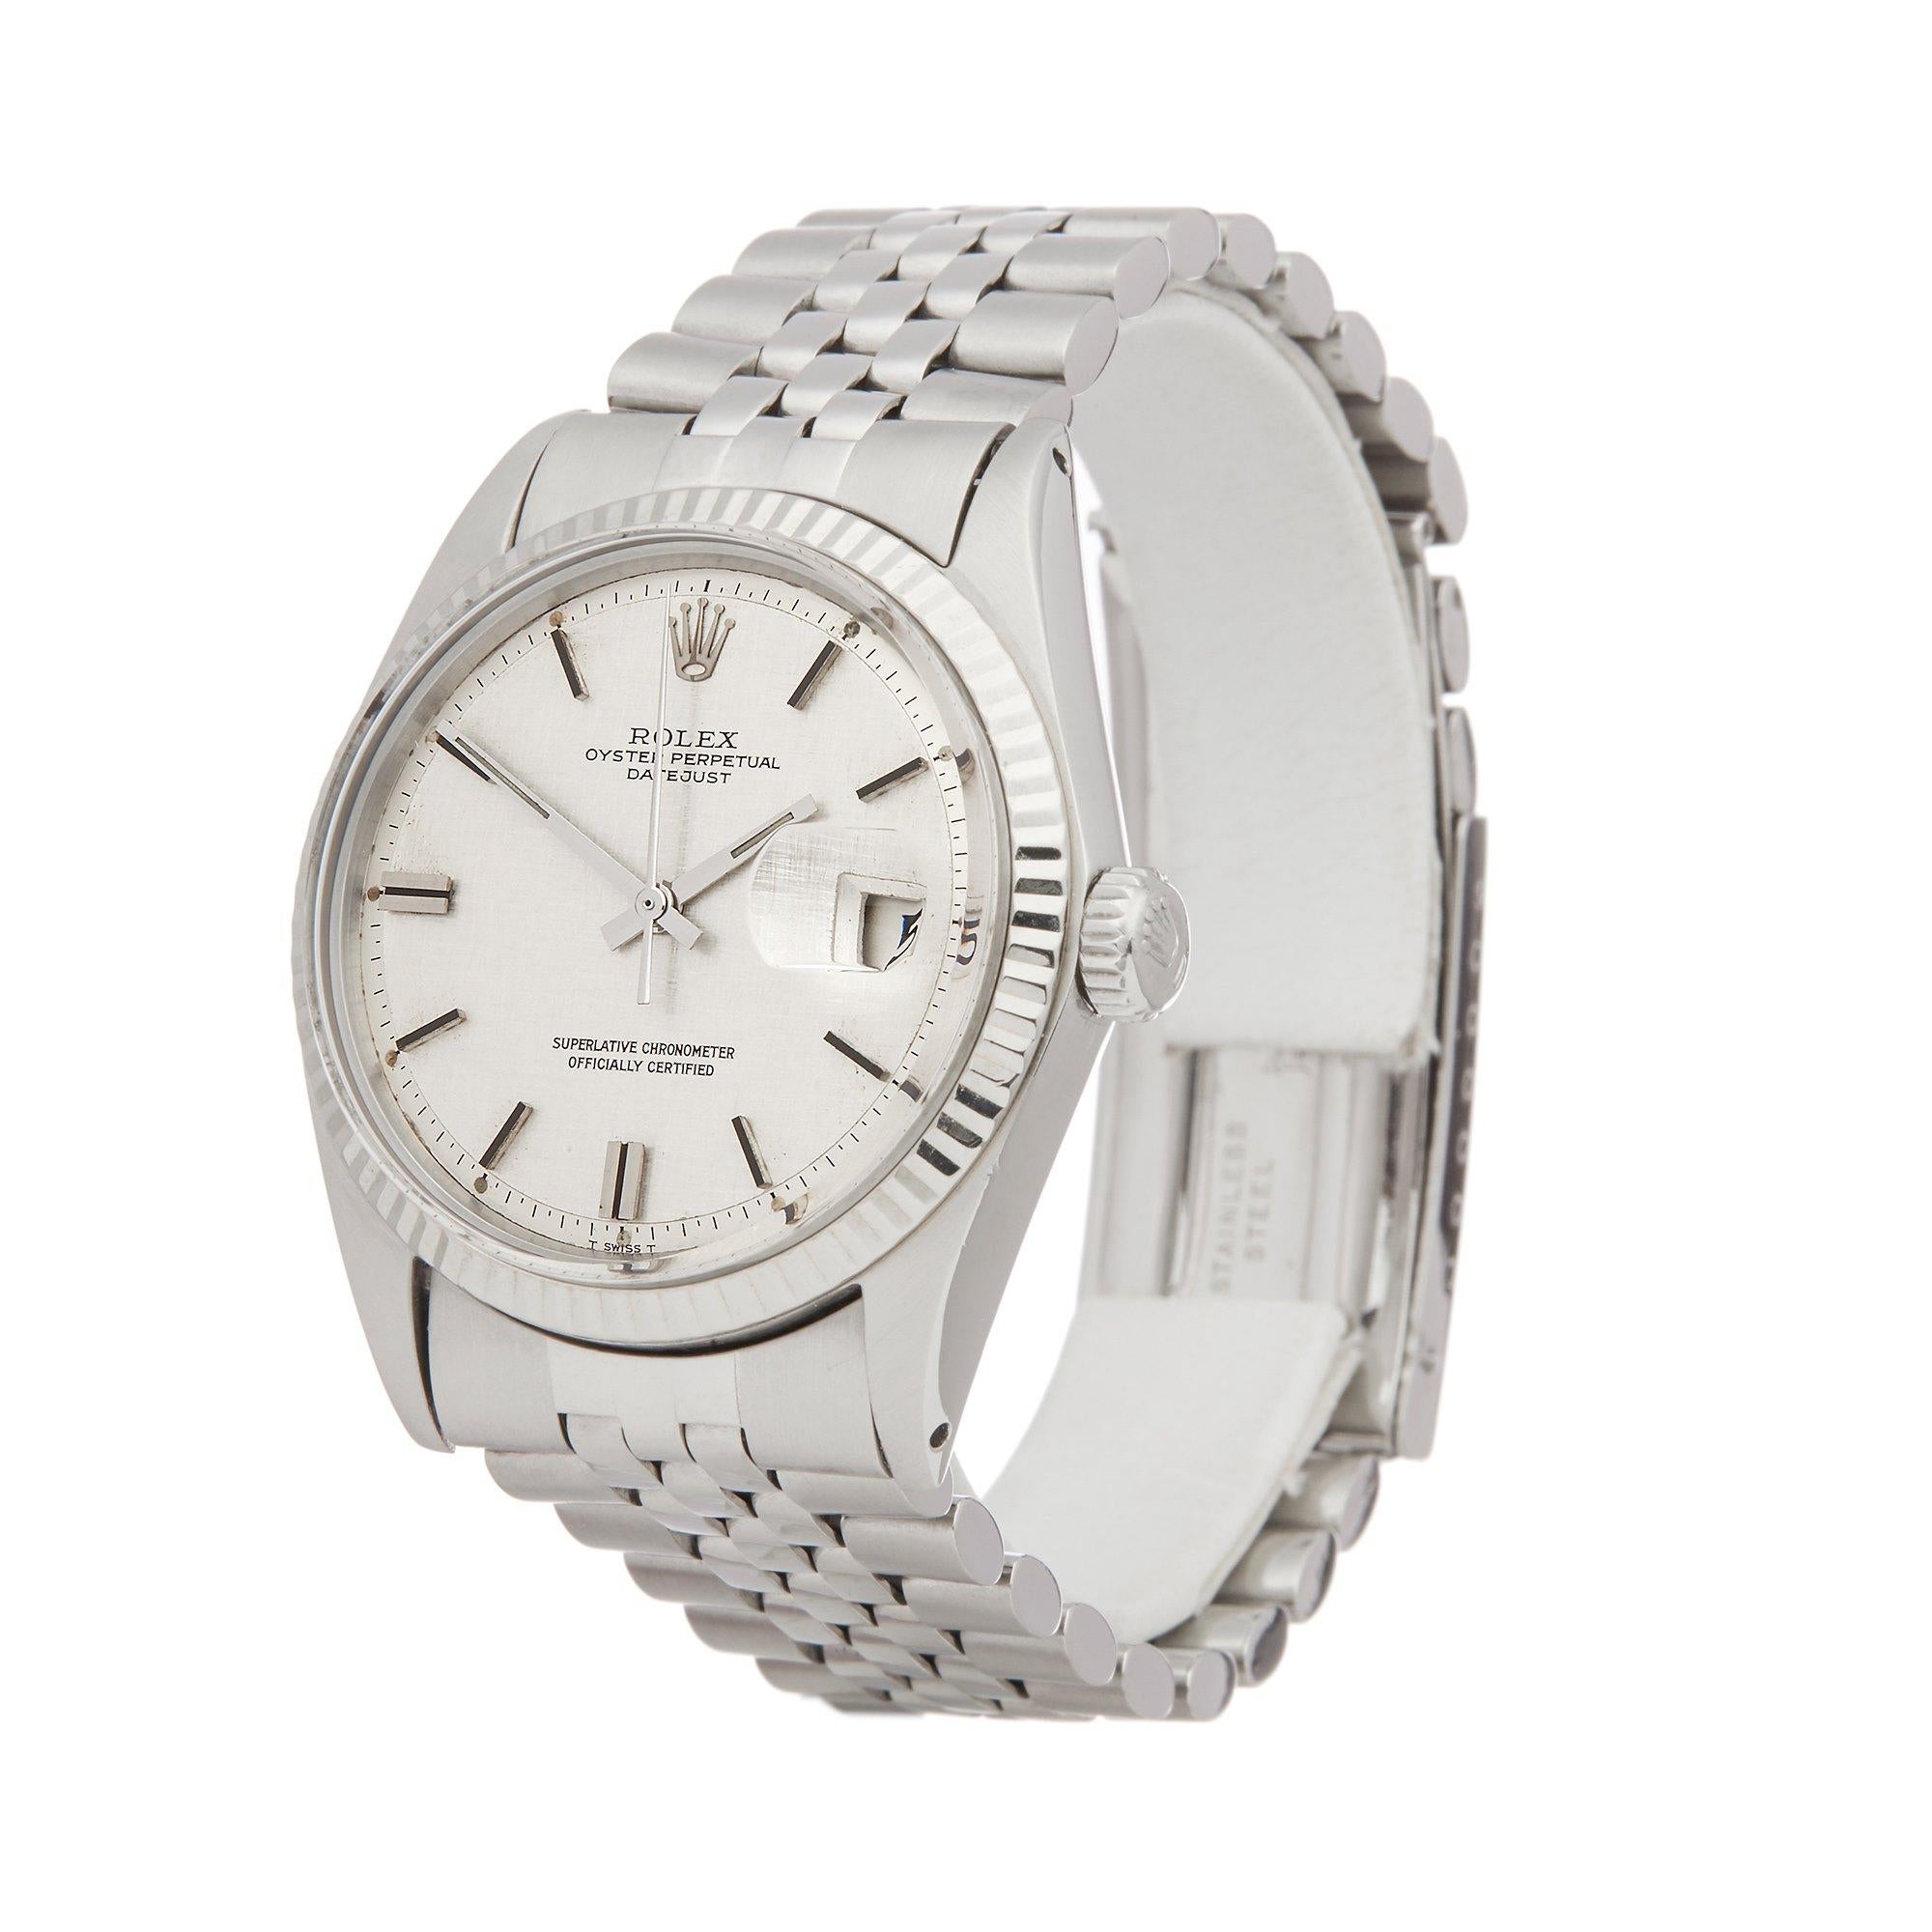 Xupes Reference: W007381
Manufacturer: Rolex
Model: Datejust
Model Variant: 36
Model Number: 1601
Age: 1970
Gender: Men
Complete With: Rolex Box
Dial: Silver Baton
Glass: Plexiglass
Case Size: 36mm
Case Material: Stainless Steel
Strap Material: